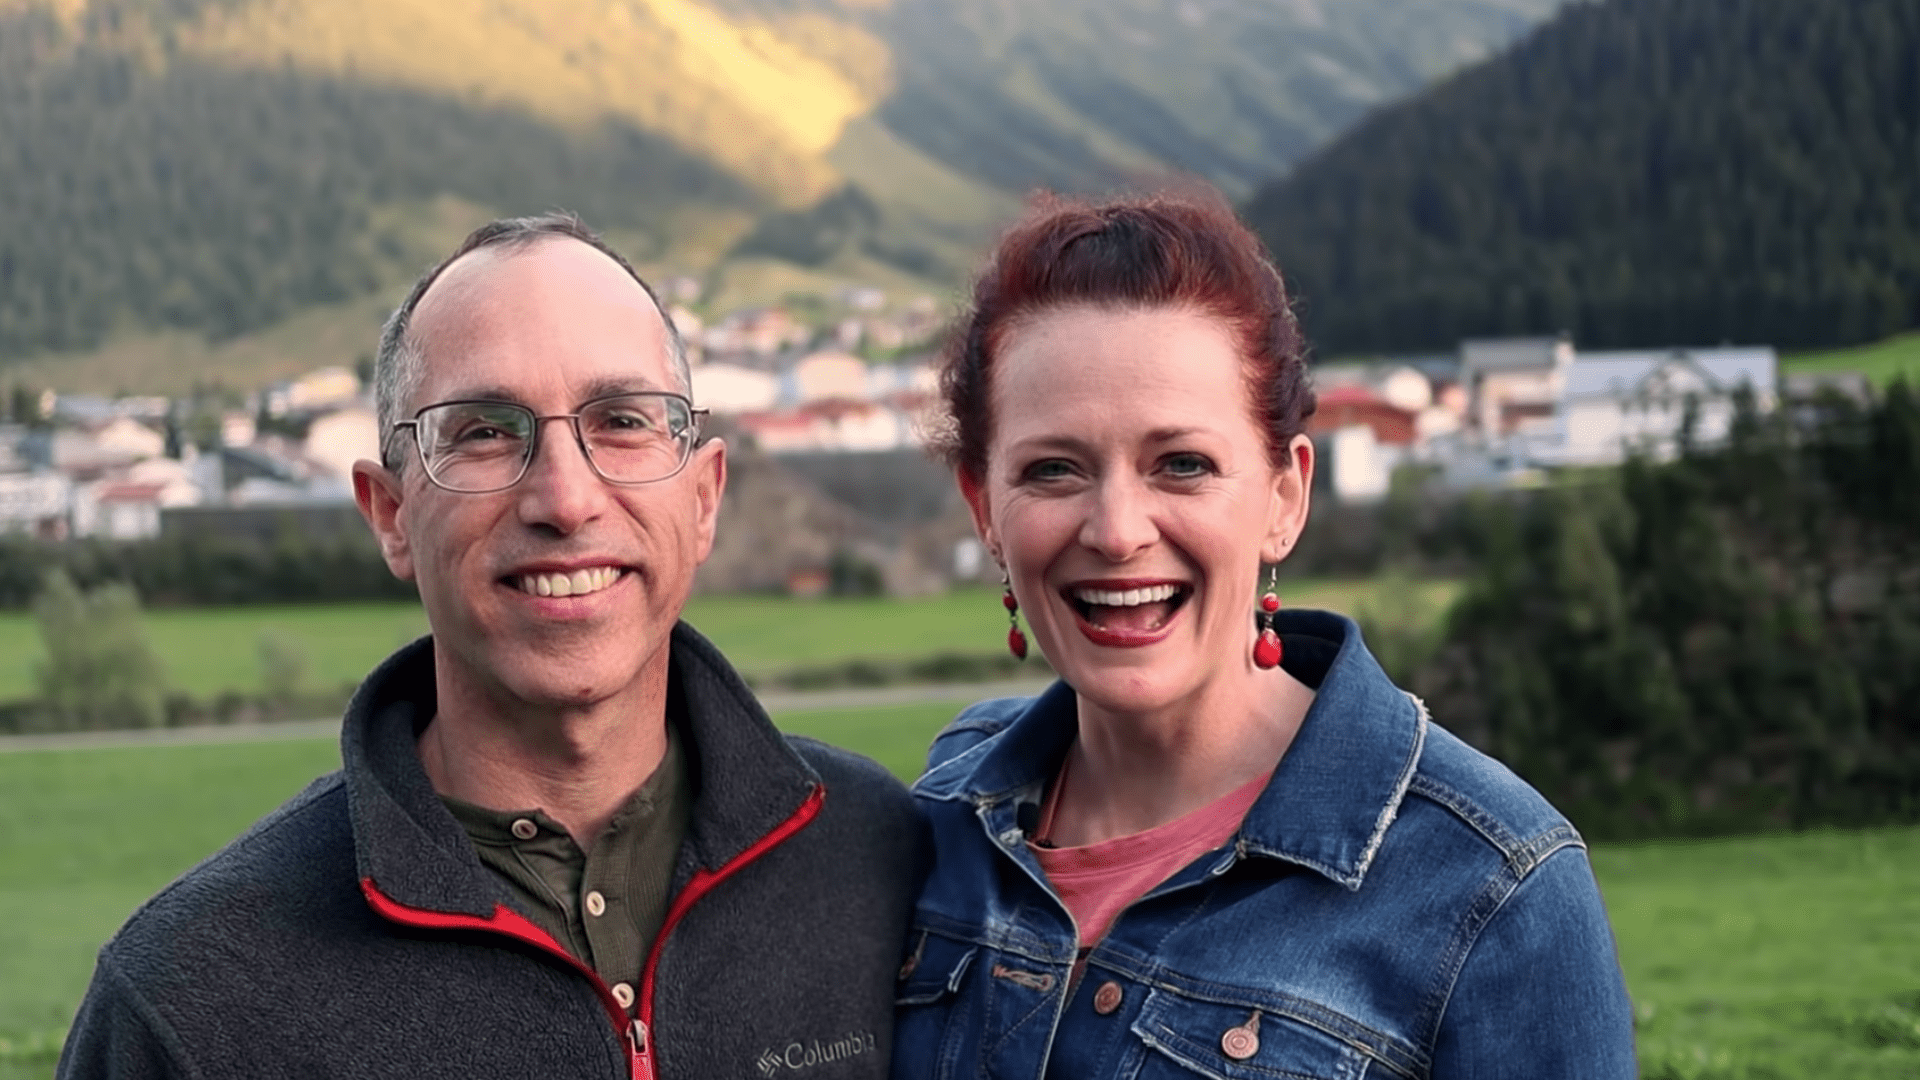 Our Vacation to Galtür, Austria + the Tyrolean Alps | My Merry Messy Life